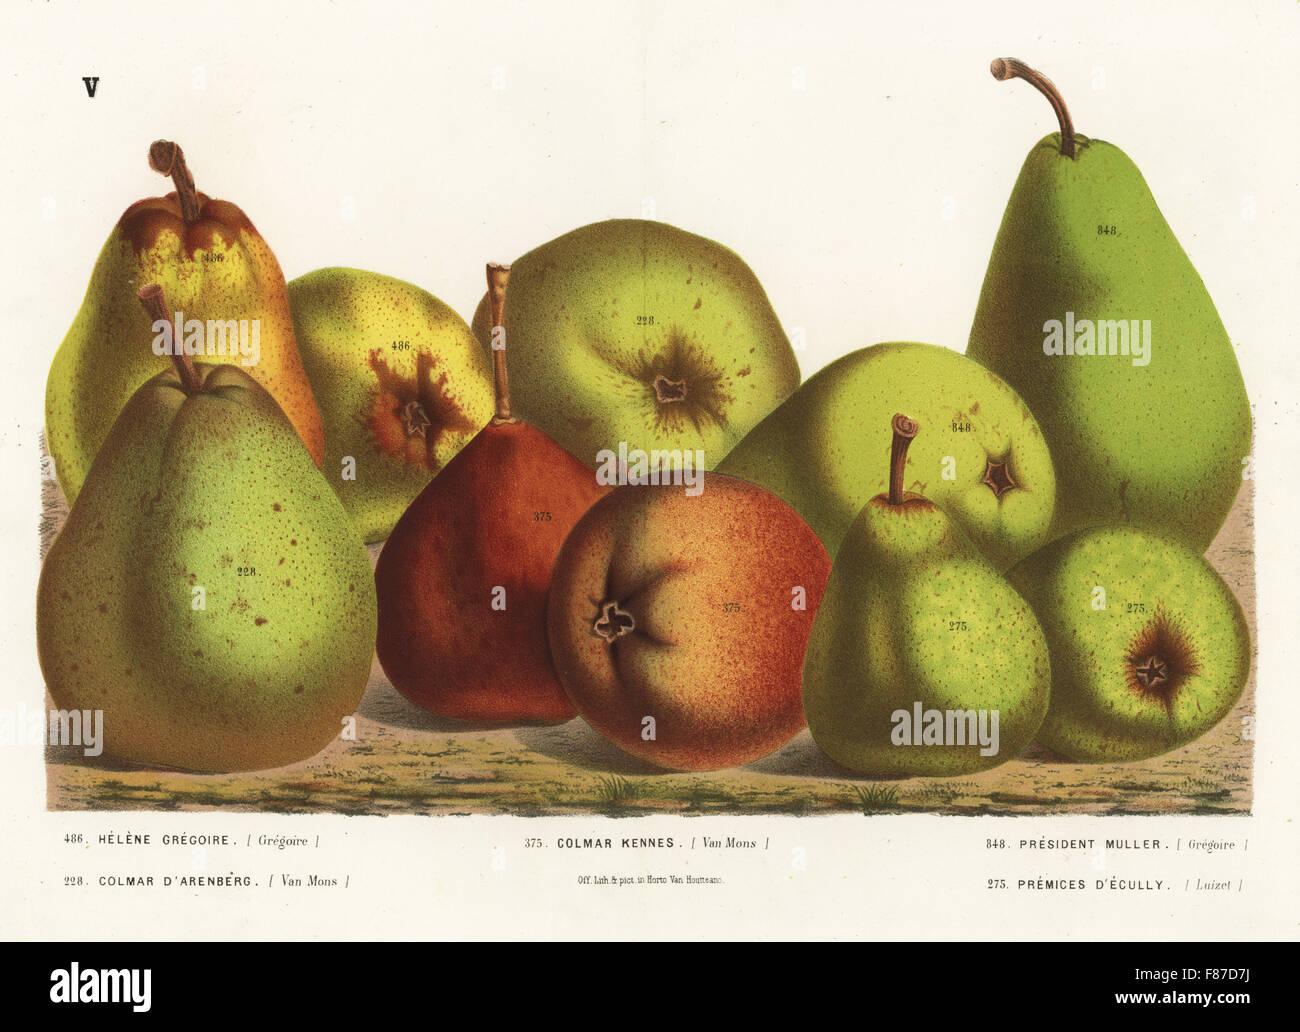 Varieties of pear, Pyrus communis: Helene Gregoire, Colmar d'Arenberg, Colmar Kennes, President Muller and Premices d'Ecully. Handcoloured lithograph from Louis van Houtte and Charles Lemaire's Flowers of the Gardens and Hothouses of Europe, Flore des Serres et des Jardins de l'Europe, Ghent, Belgium, 1874. Stock Photo